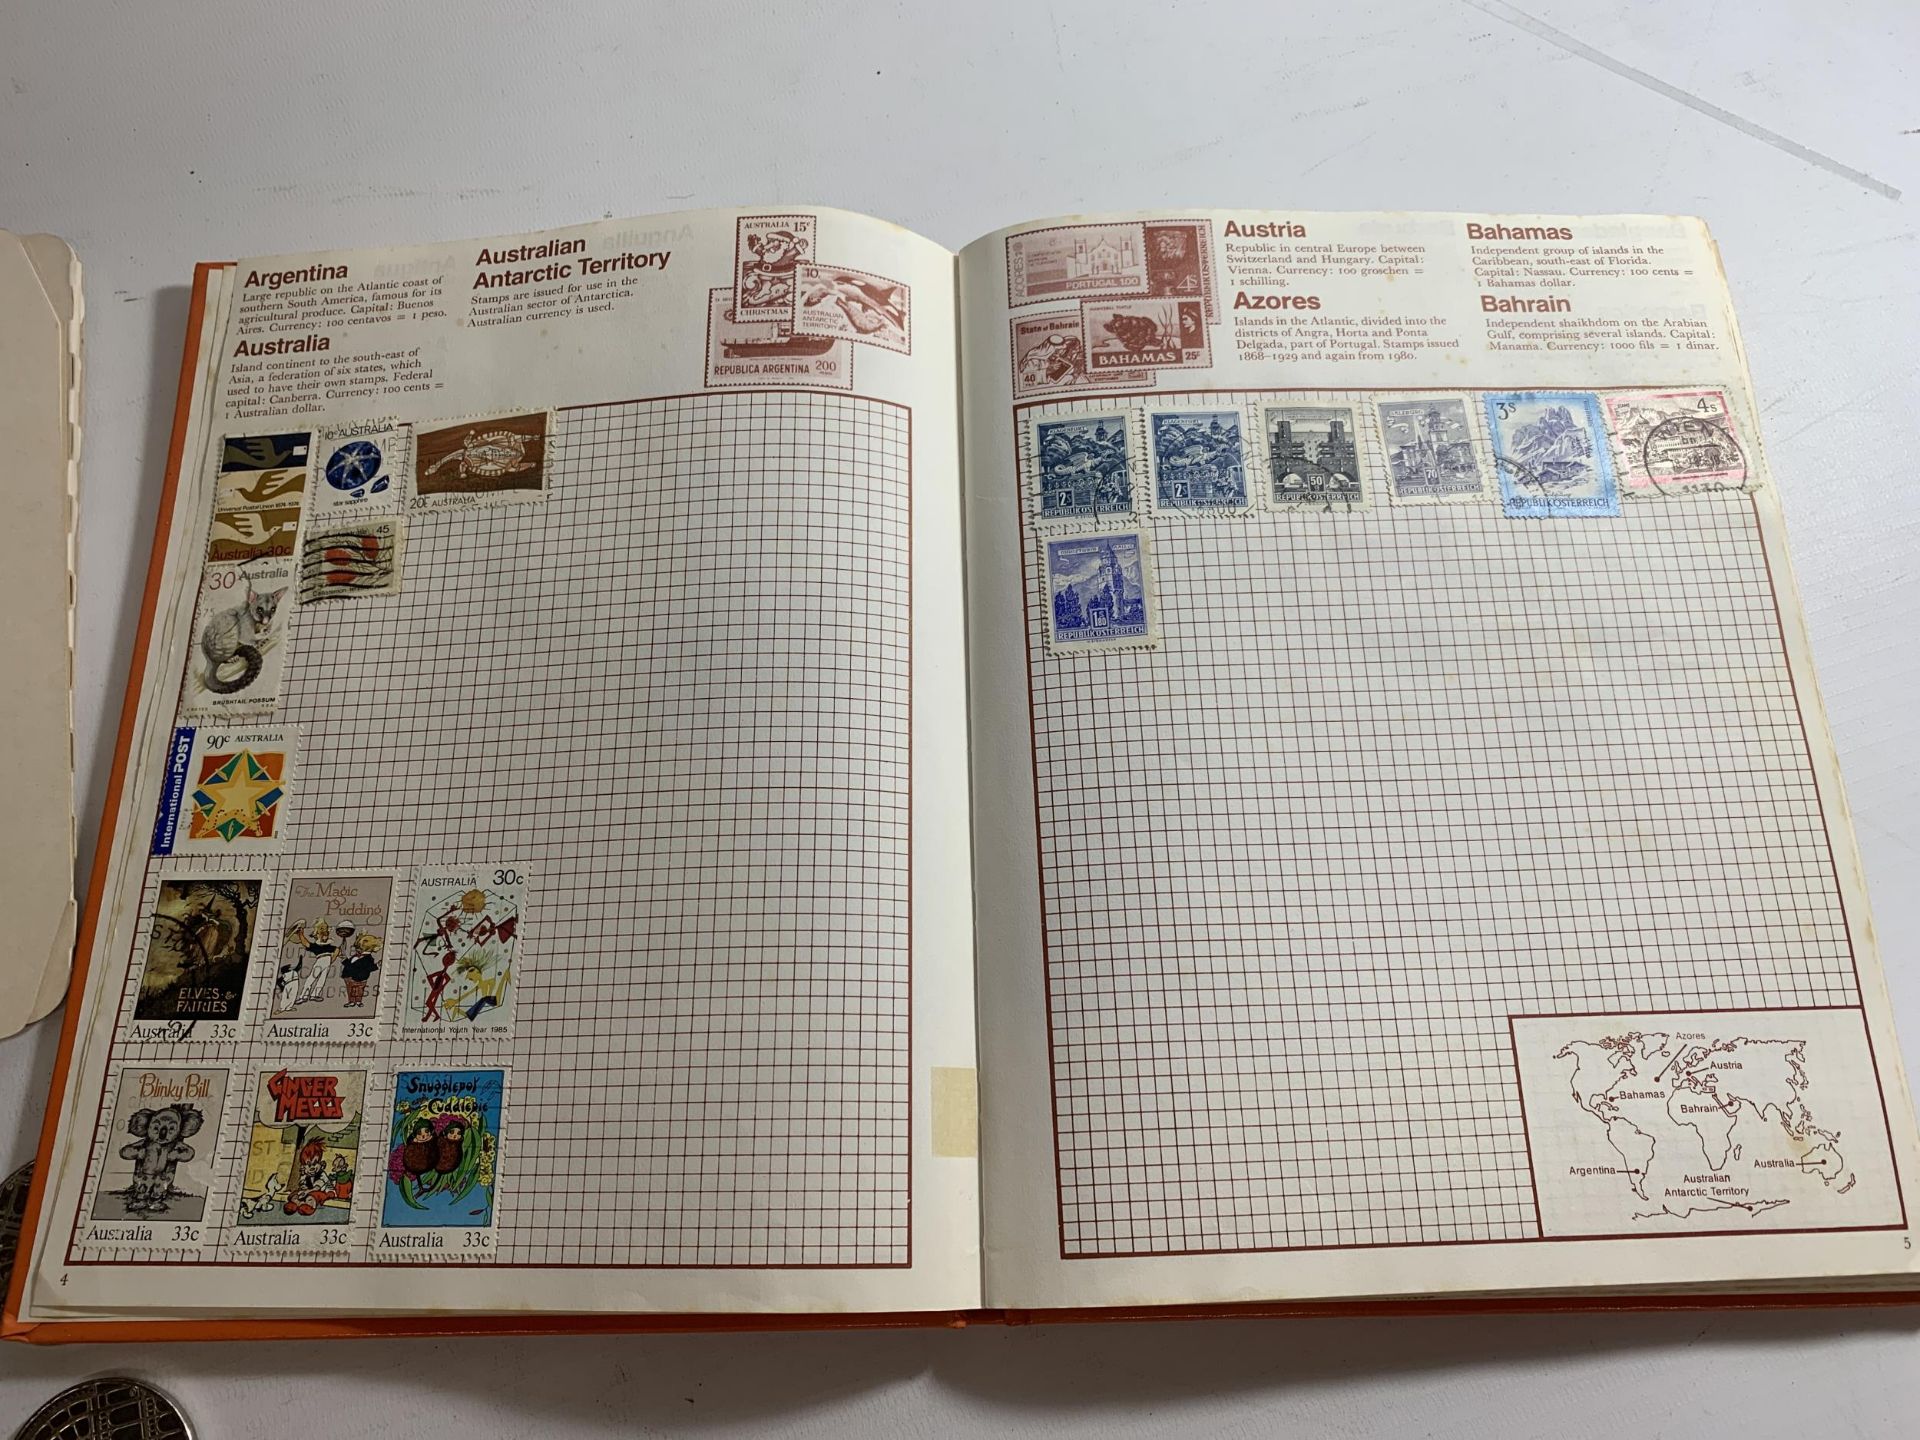 A STANLEY GIBBON KALEIDOSCOPE STAMP ALBUM CONTAINING STAMPS OF THE WORLD TO INCLUDE QATAR, DOMINICAN - Image 3 of 7